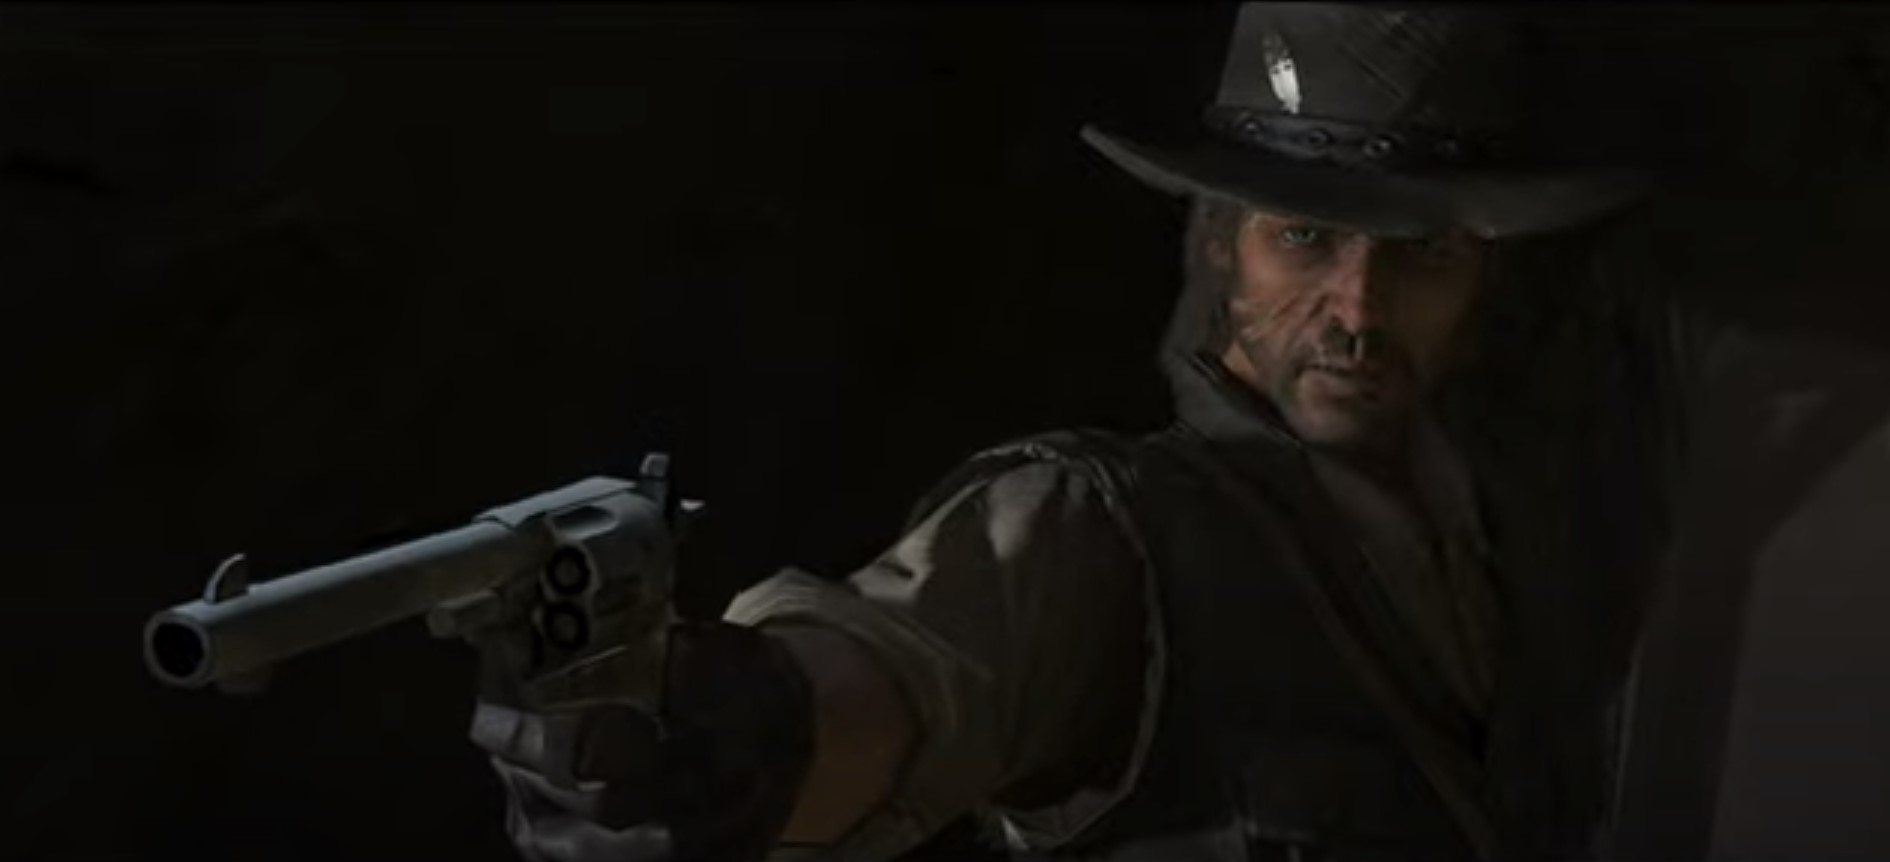 Red Dead Redemption And Undead Nightmare Expansion Comes To PS4 and Switch August 17